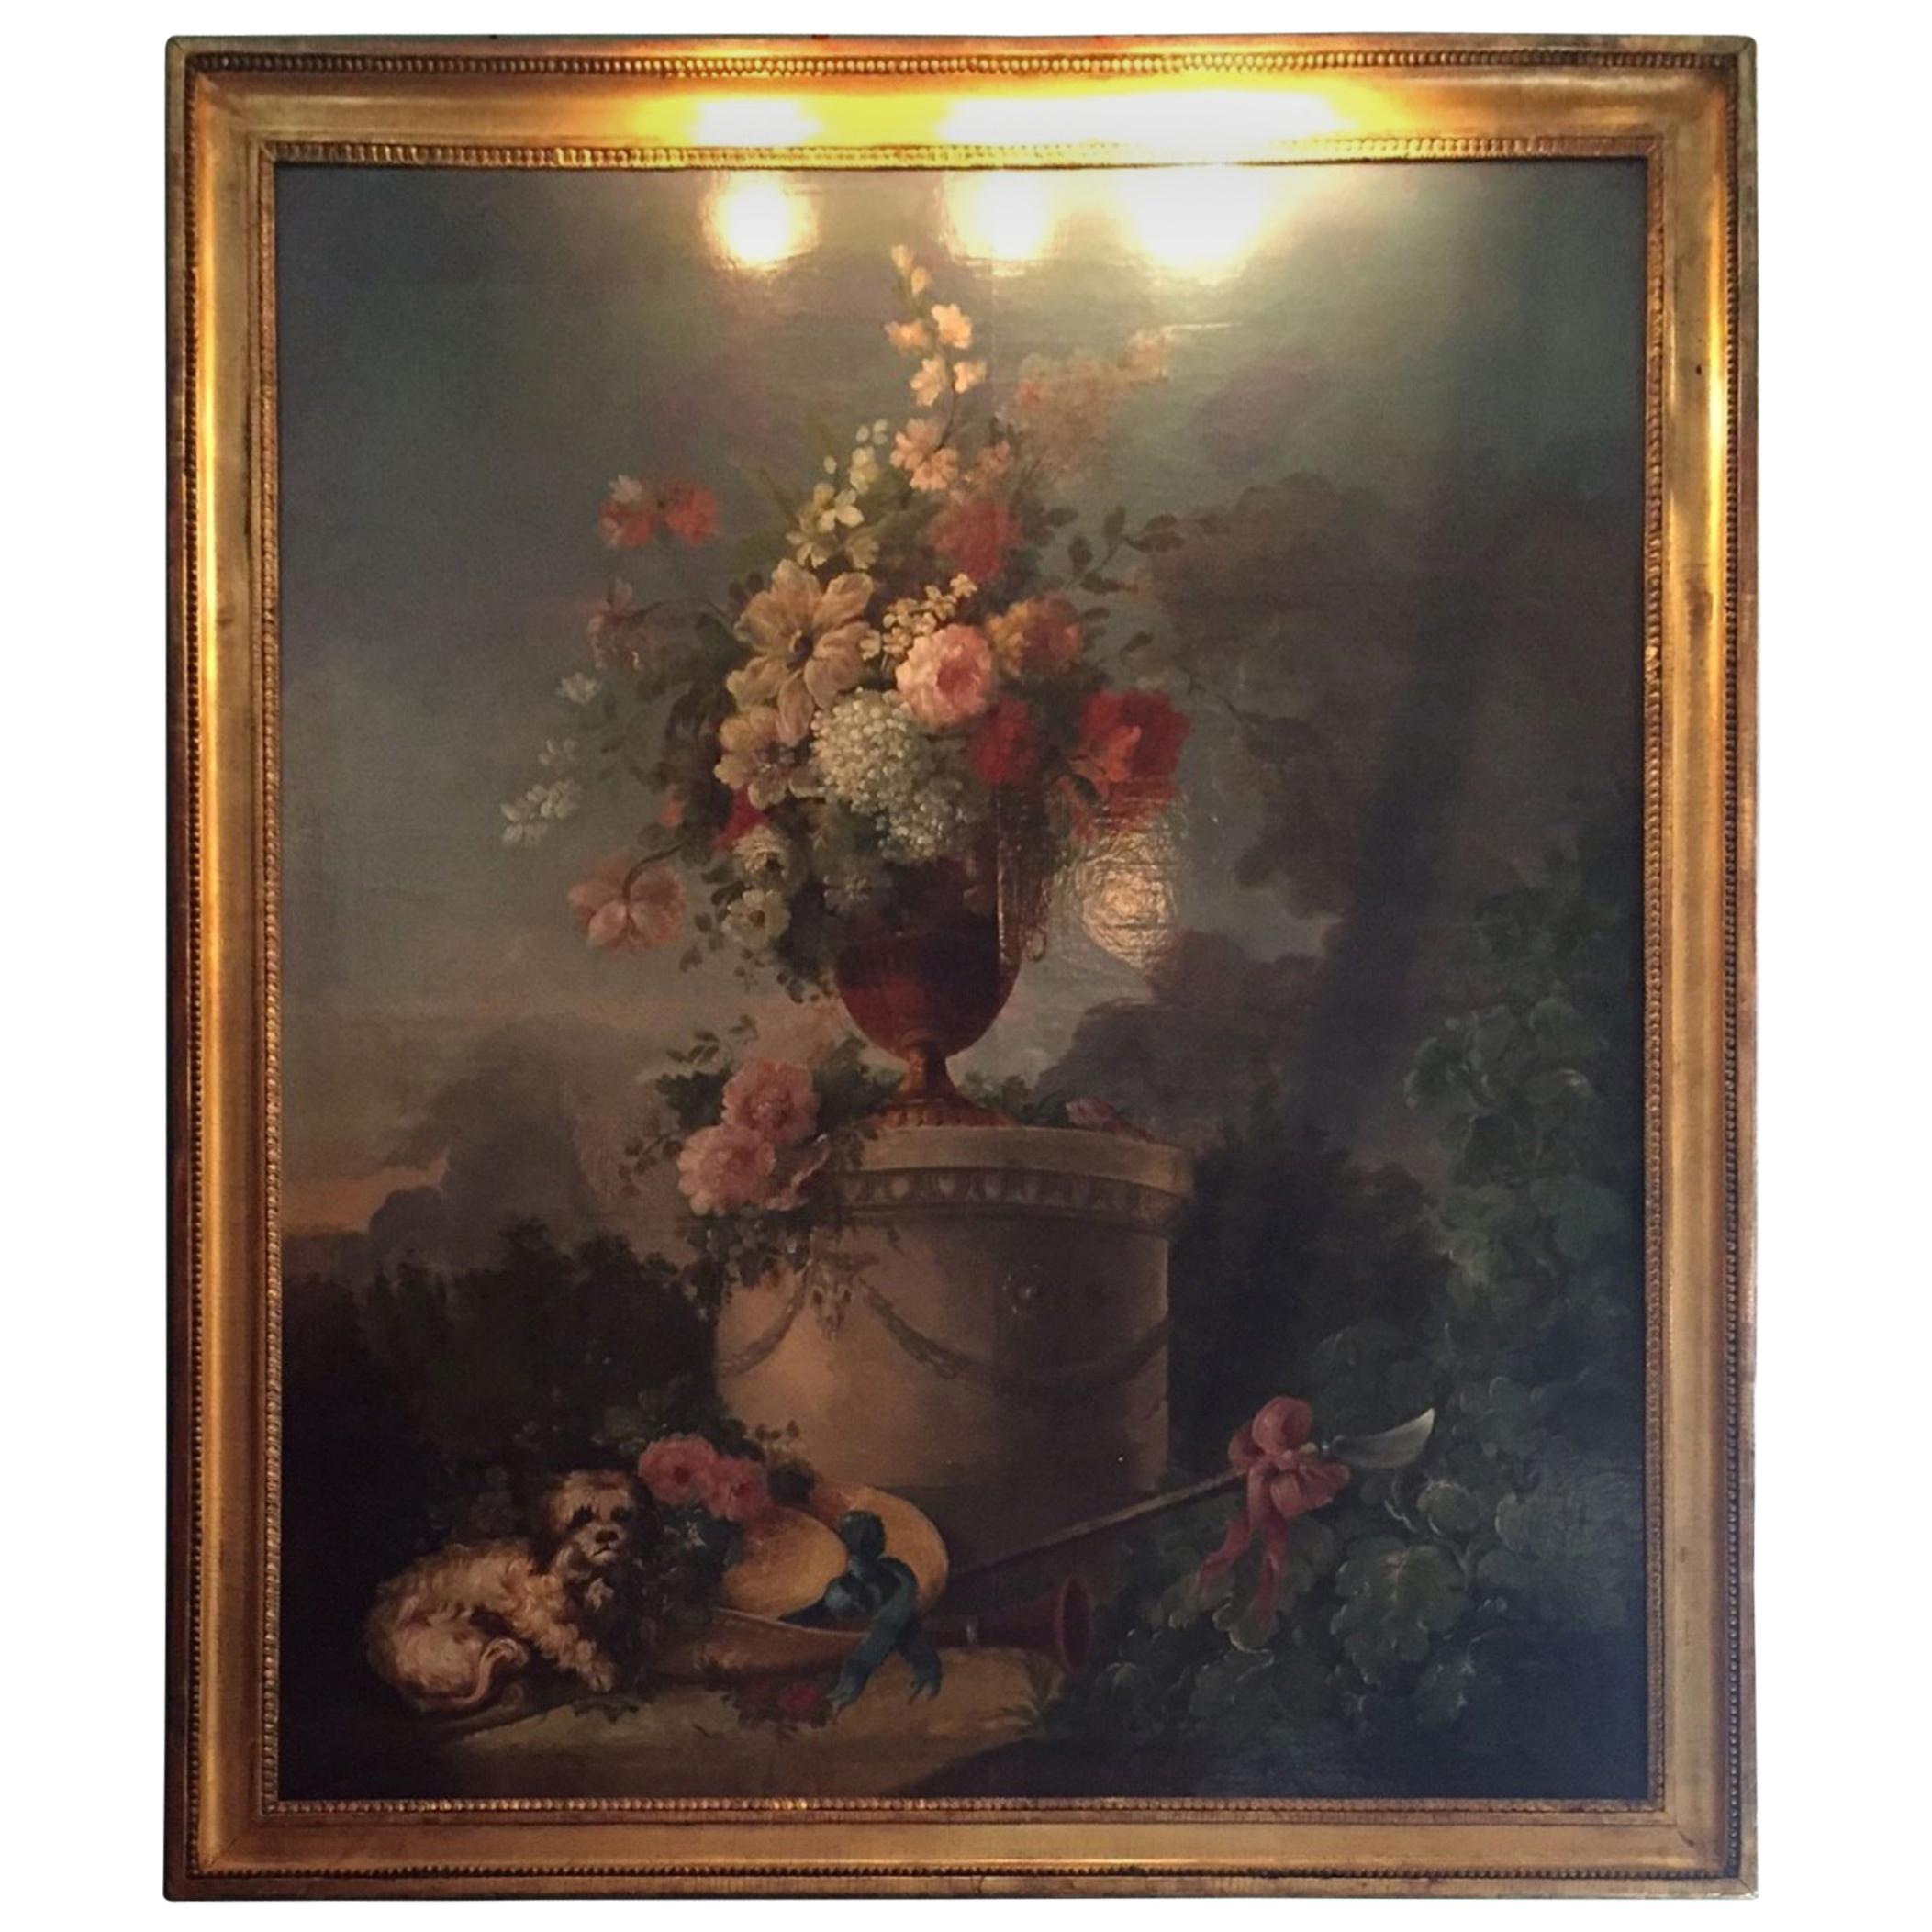 Large 18th Century Bucolic Painting Garden Scene with a Dog Flowers Antiques LA